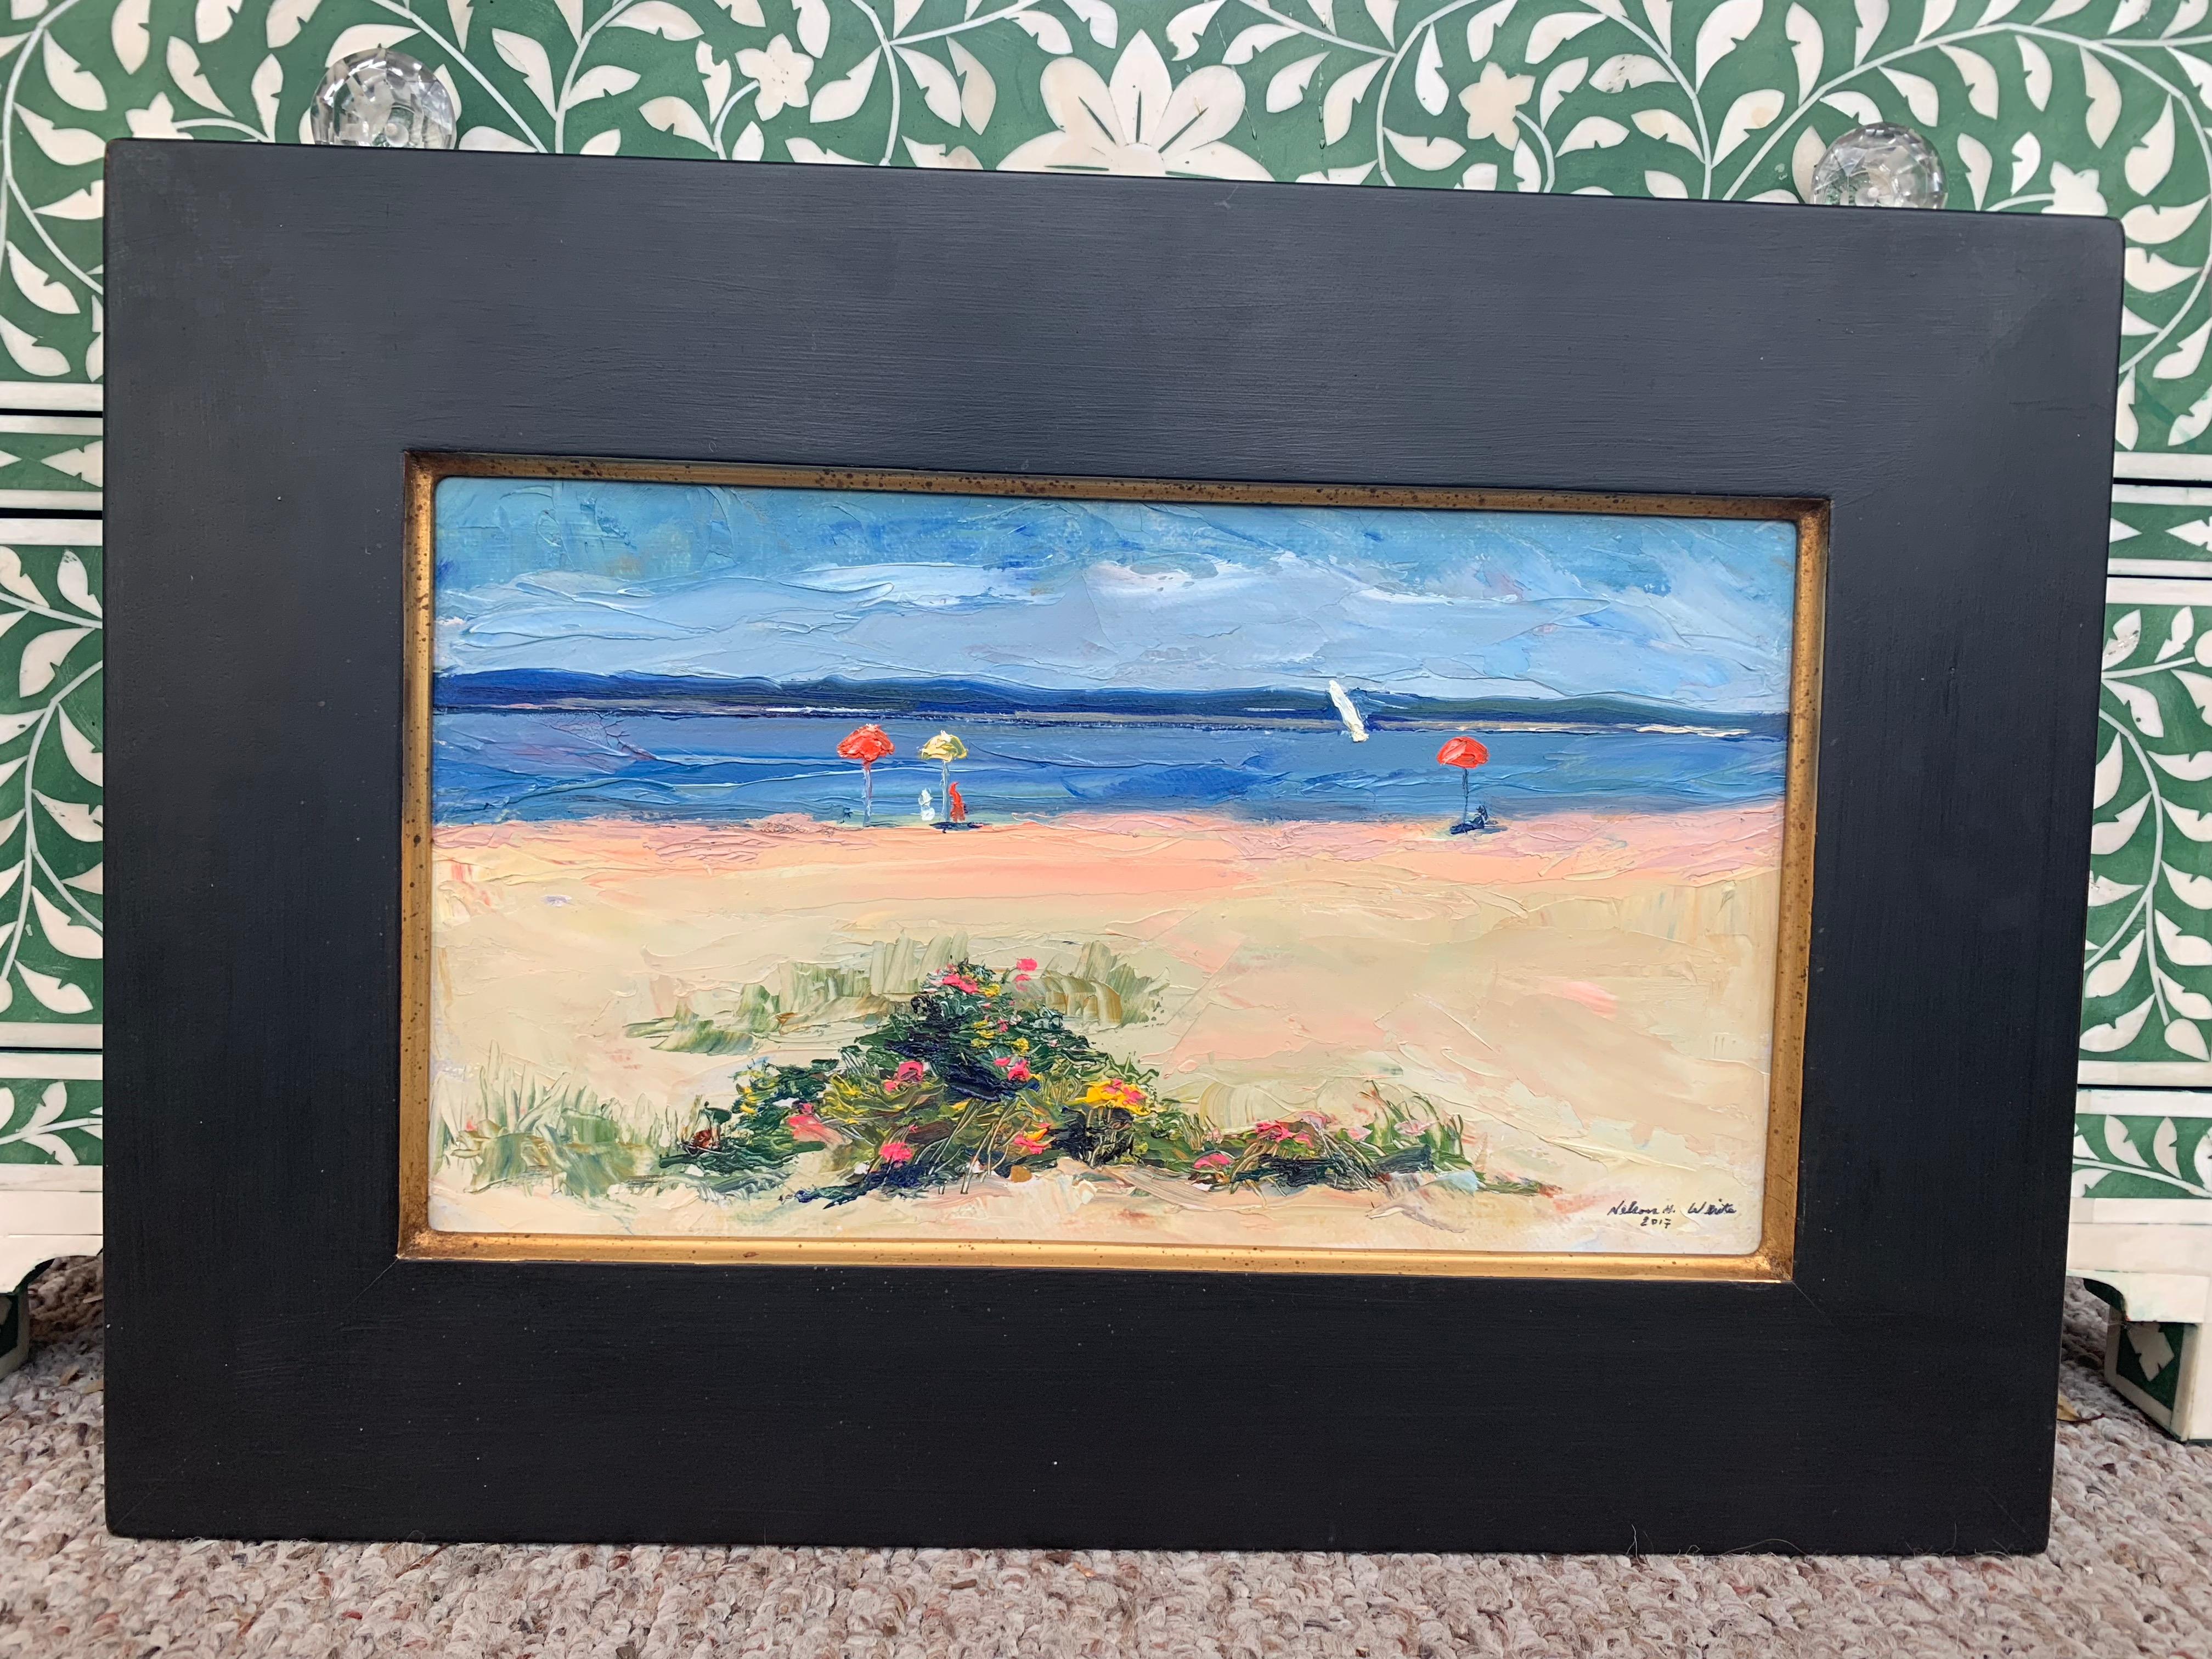 Long Beach, Sag Harbor, NY - Painting by Nelson H. White